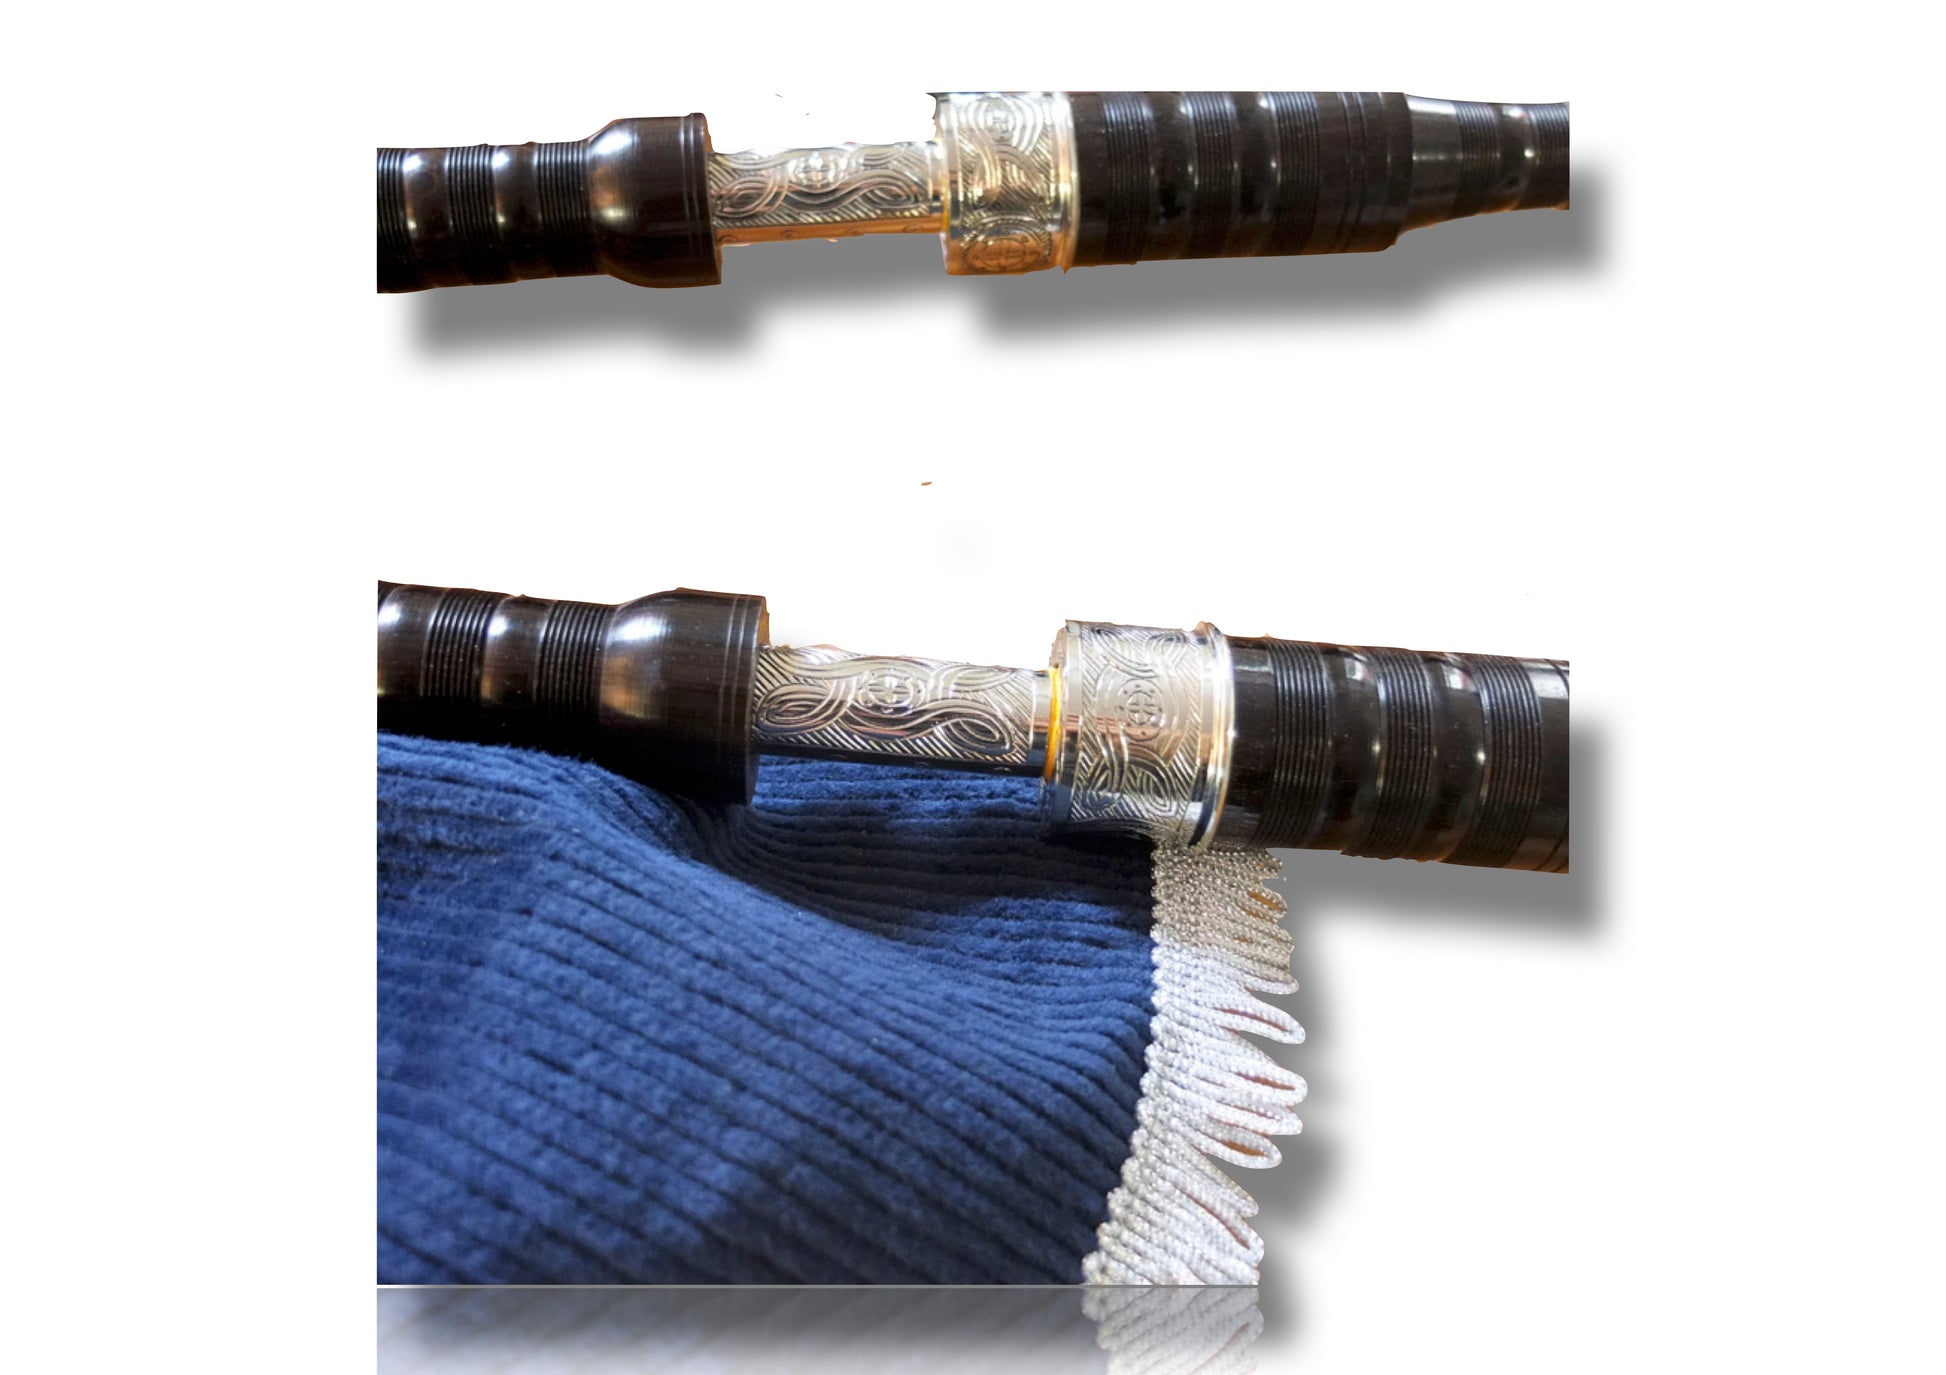 Engraved Nickle Ferrules on a set of African Blackwood Scottish Highland Bagpipes - Bagpipes Galore